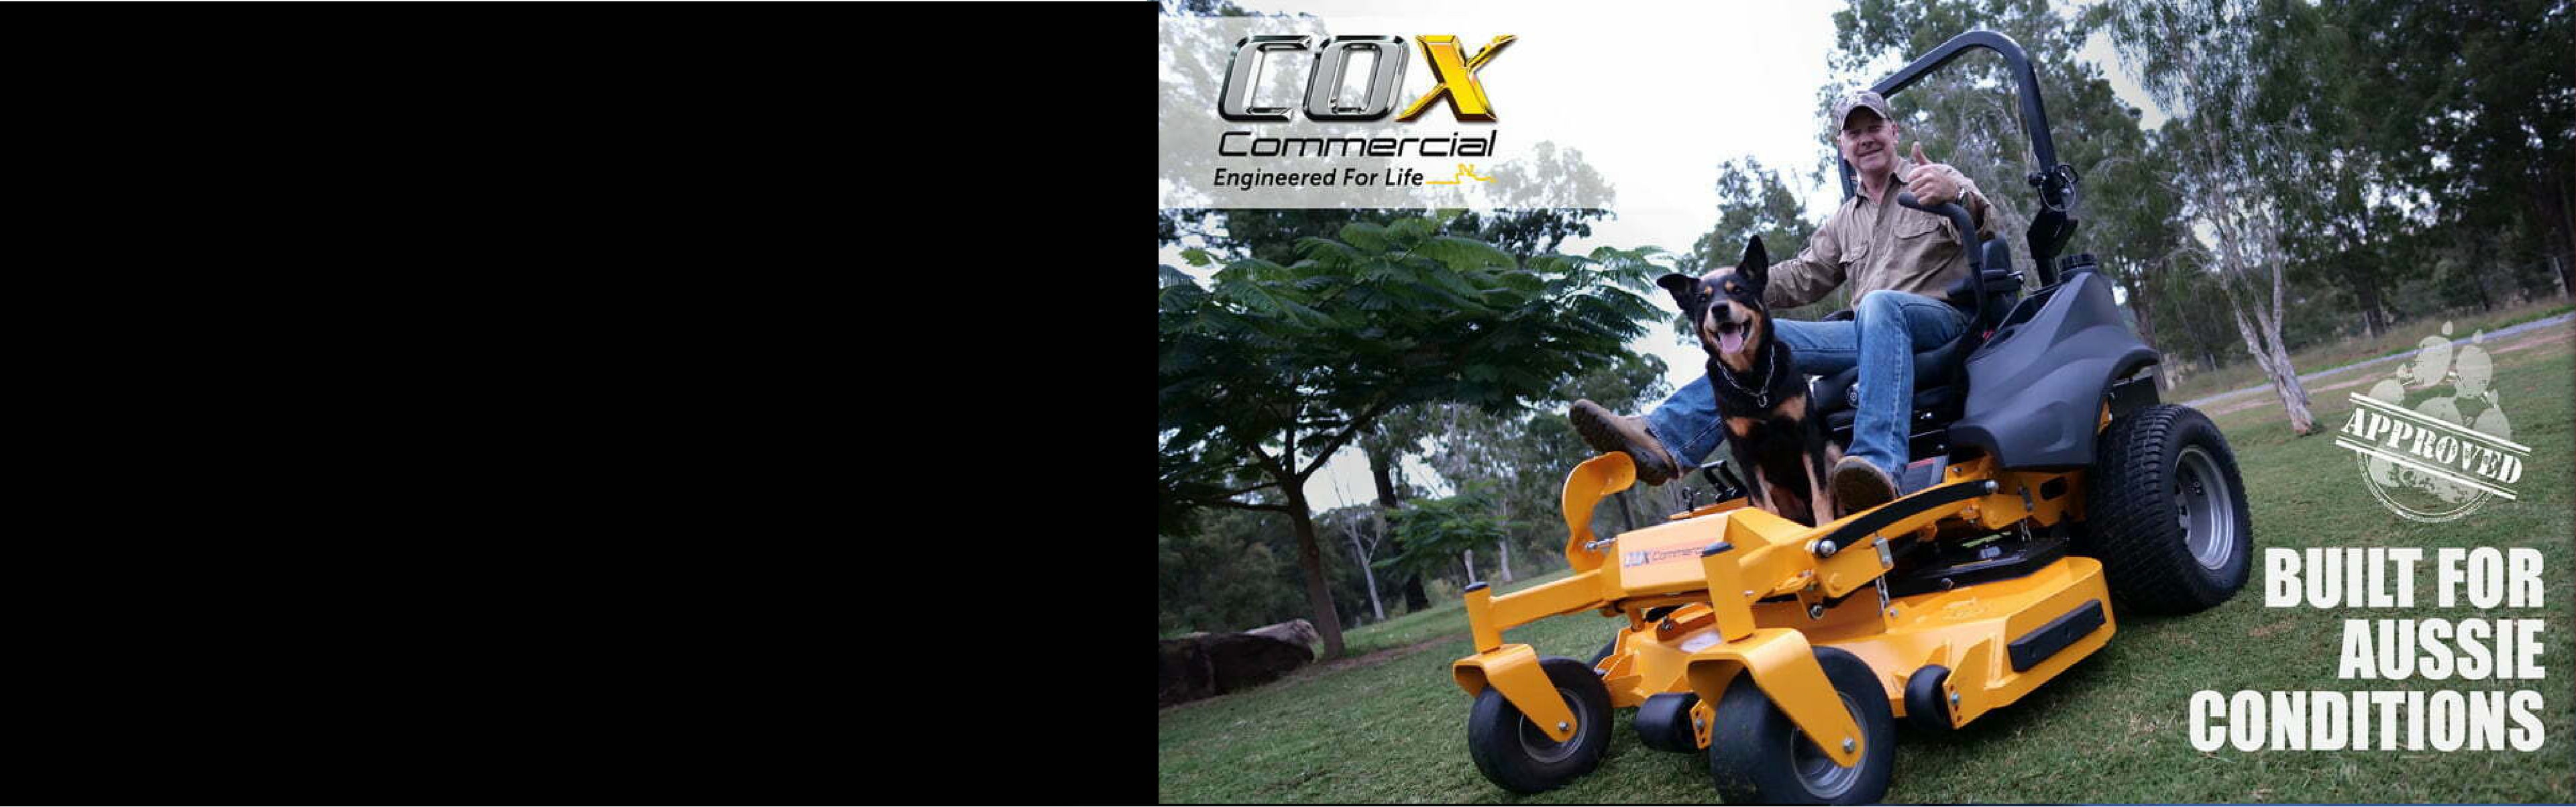 COX Mowers Commercial Series Approved_by_Jock graphic with Mark Larkham and his dog Jock sitting on a COX Mowers ride-on mower on a green lawn with trees in the background